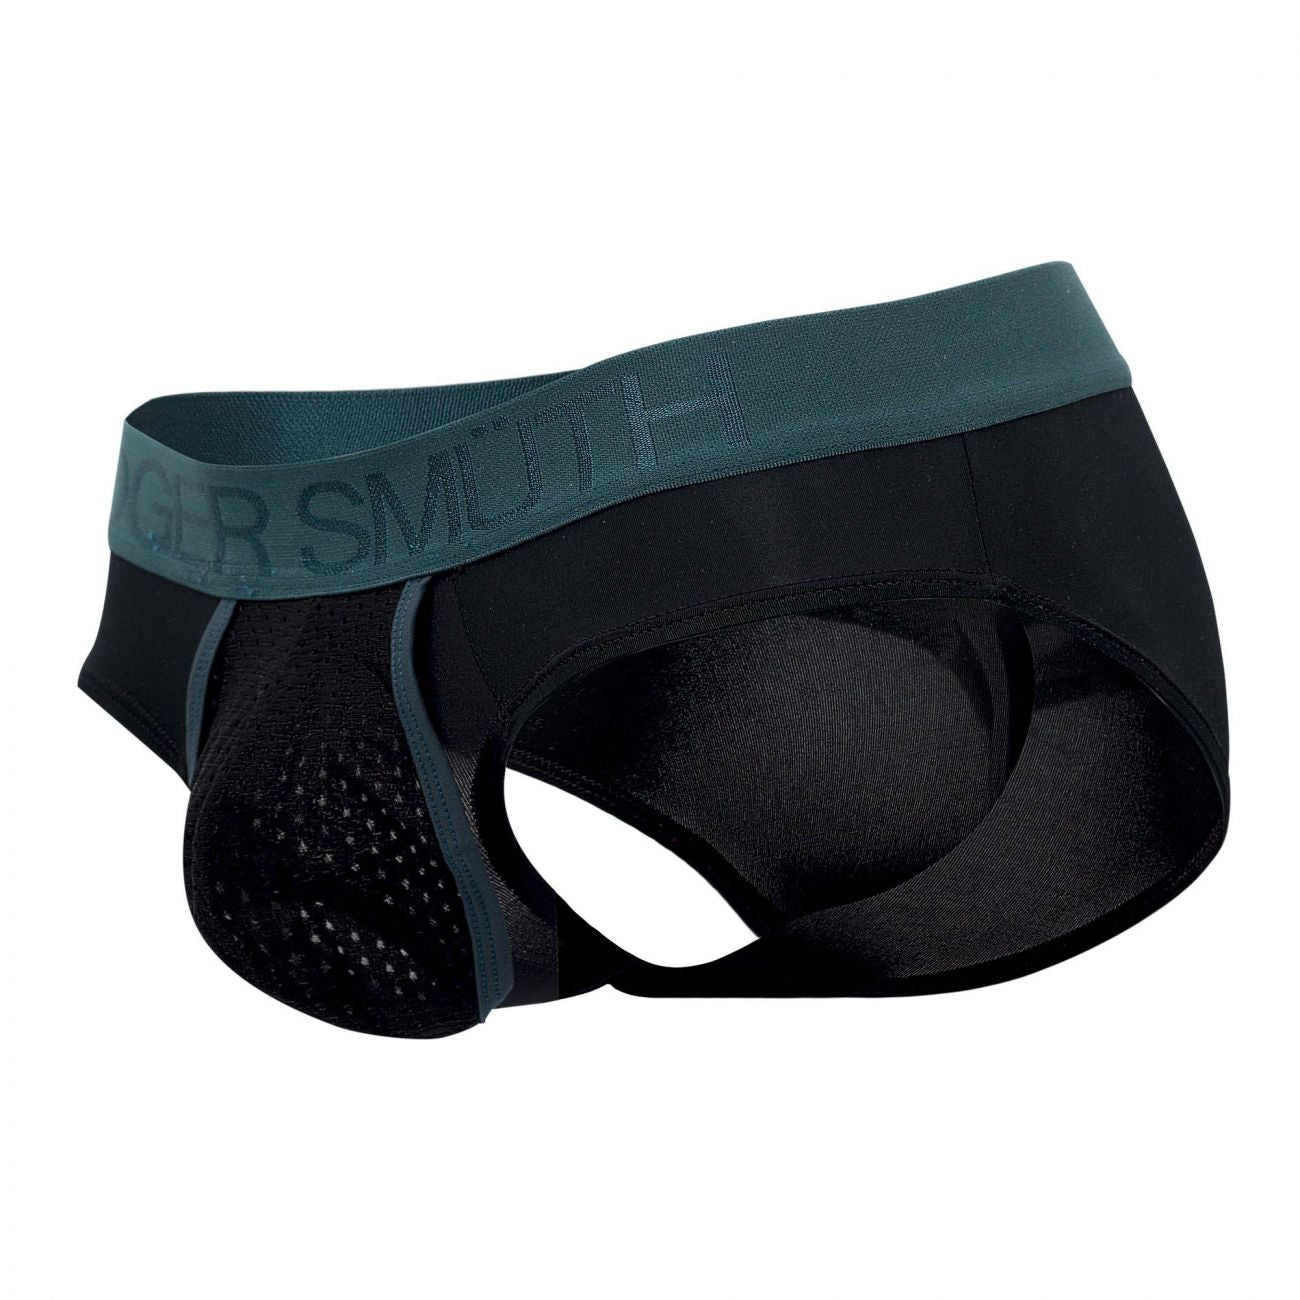 Roger Smuth RS023 Briefs Black